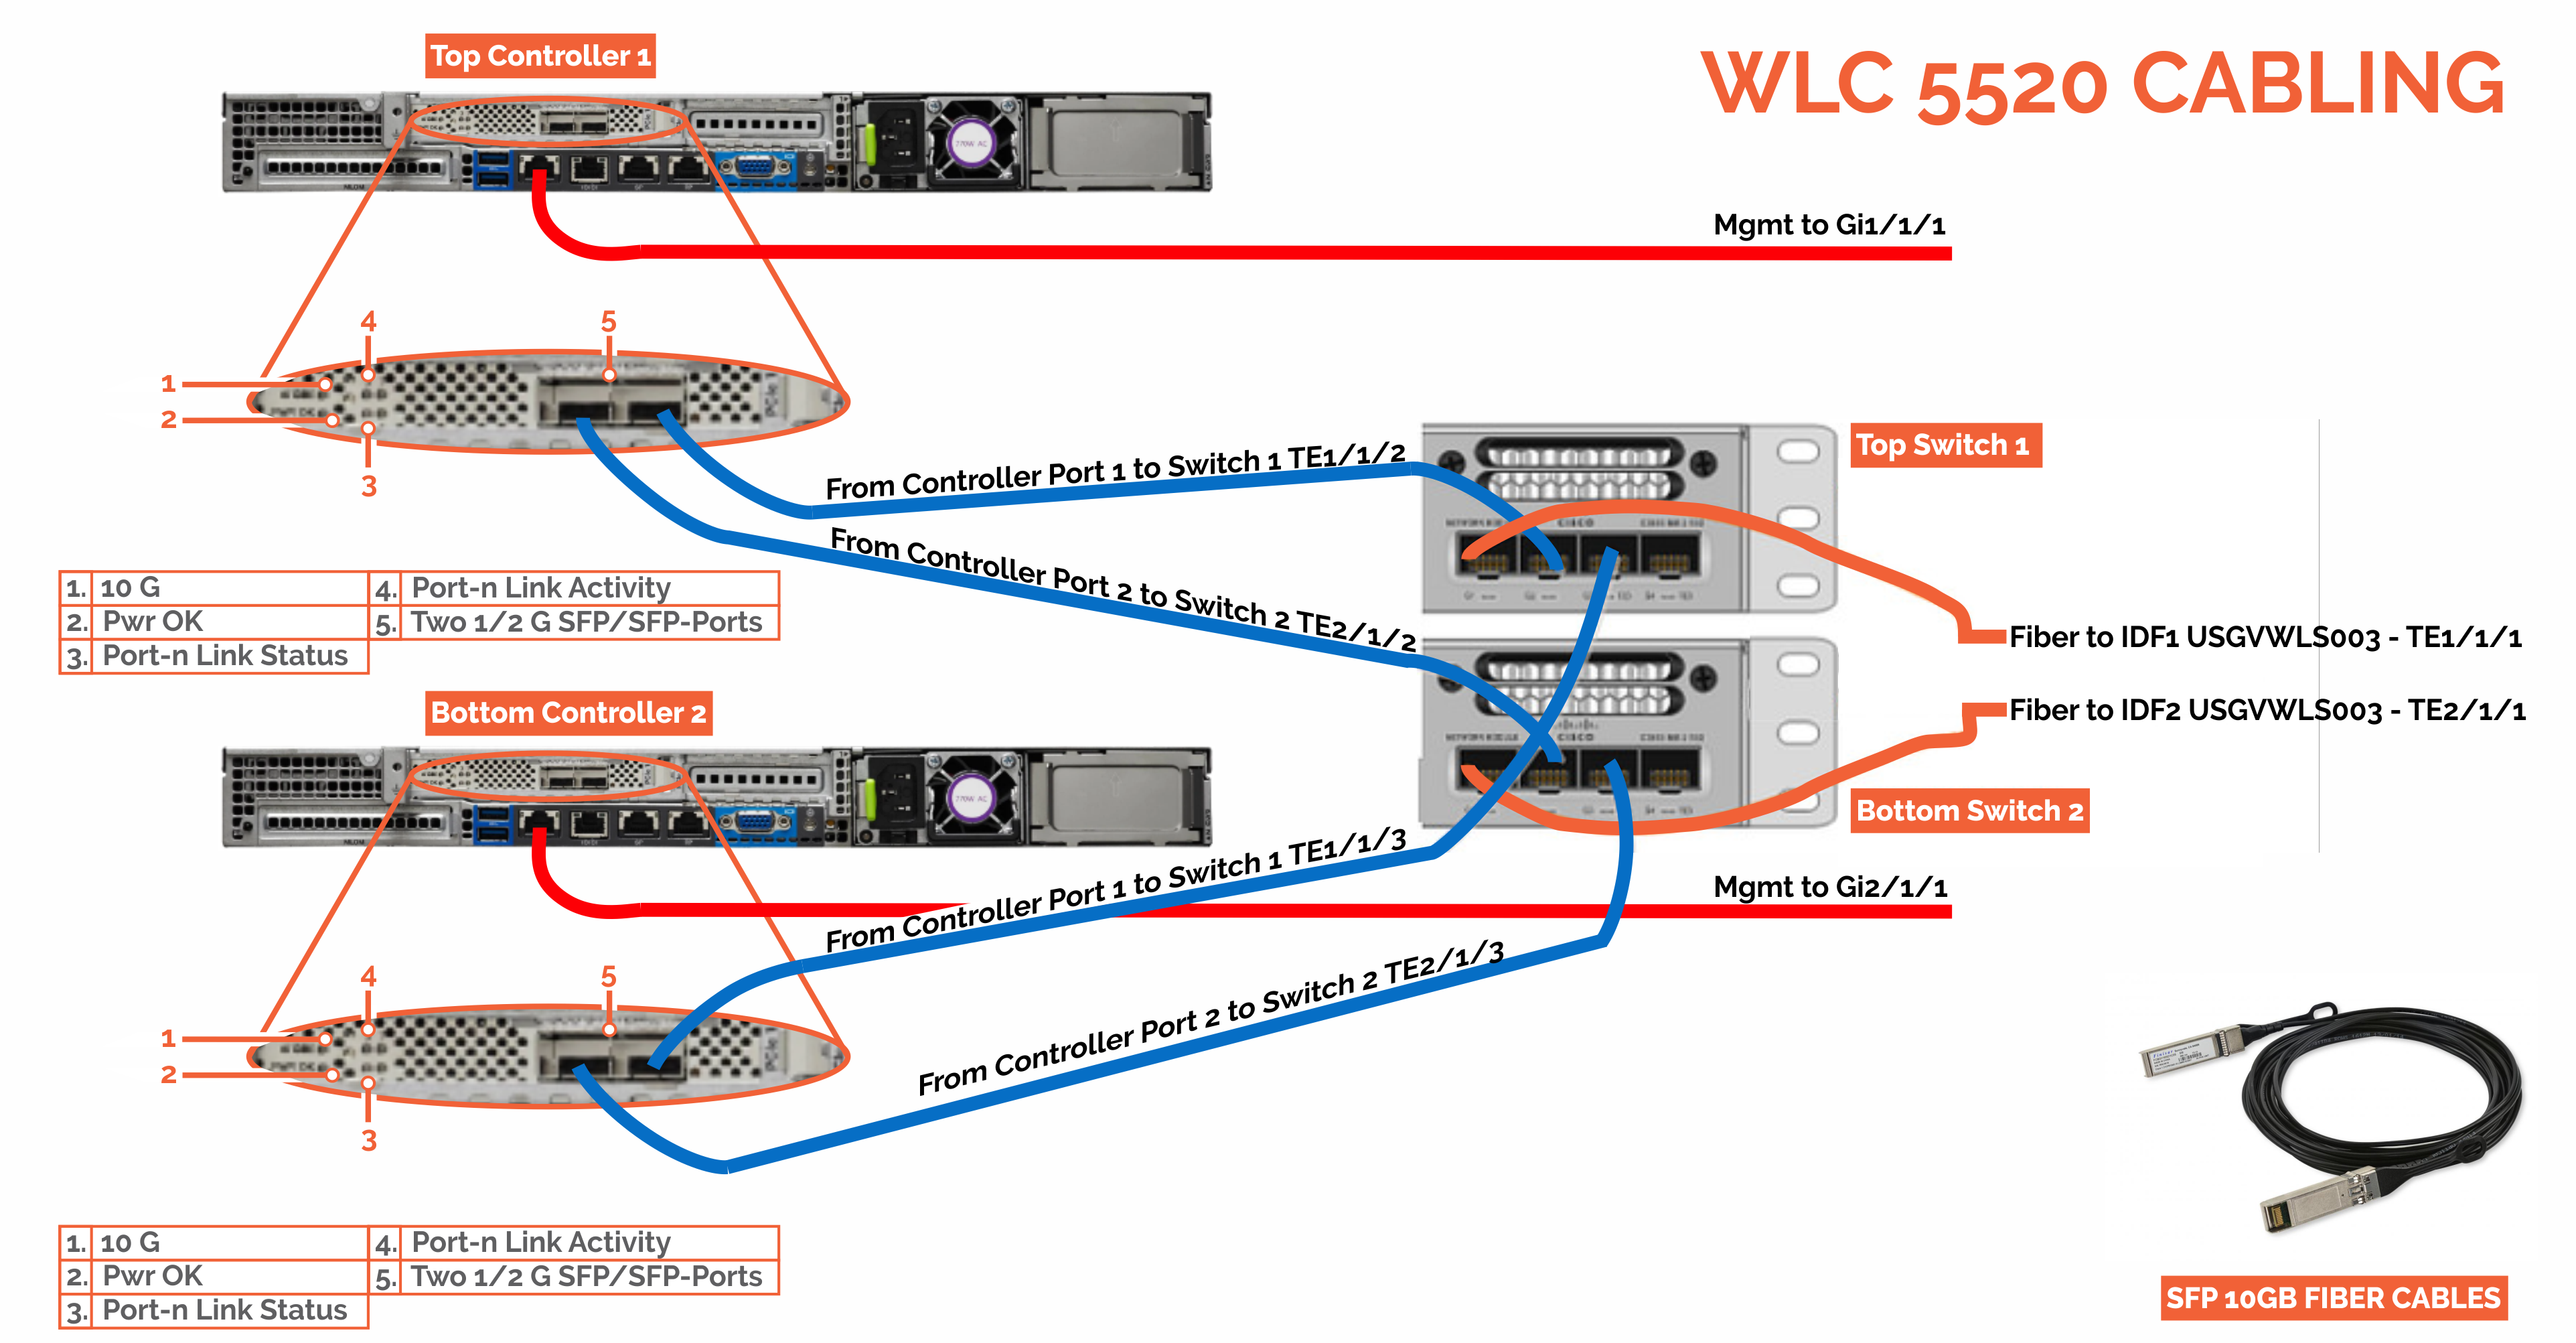 wlc 5520 ports picture with cabling graphic from pivit global